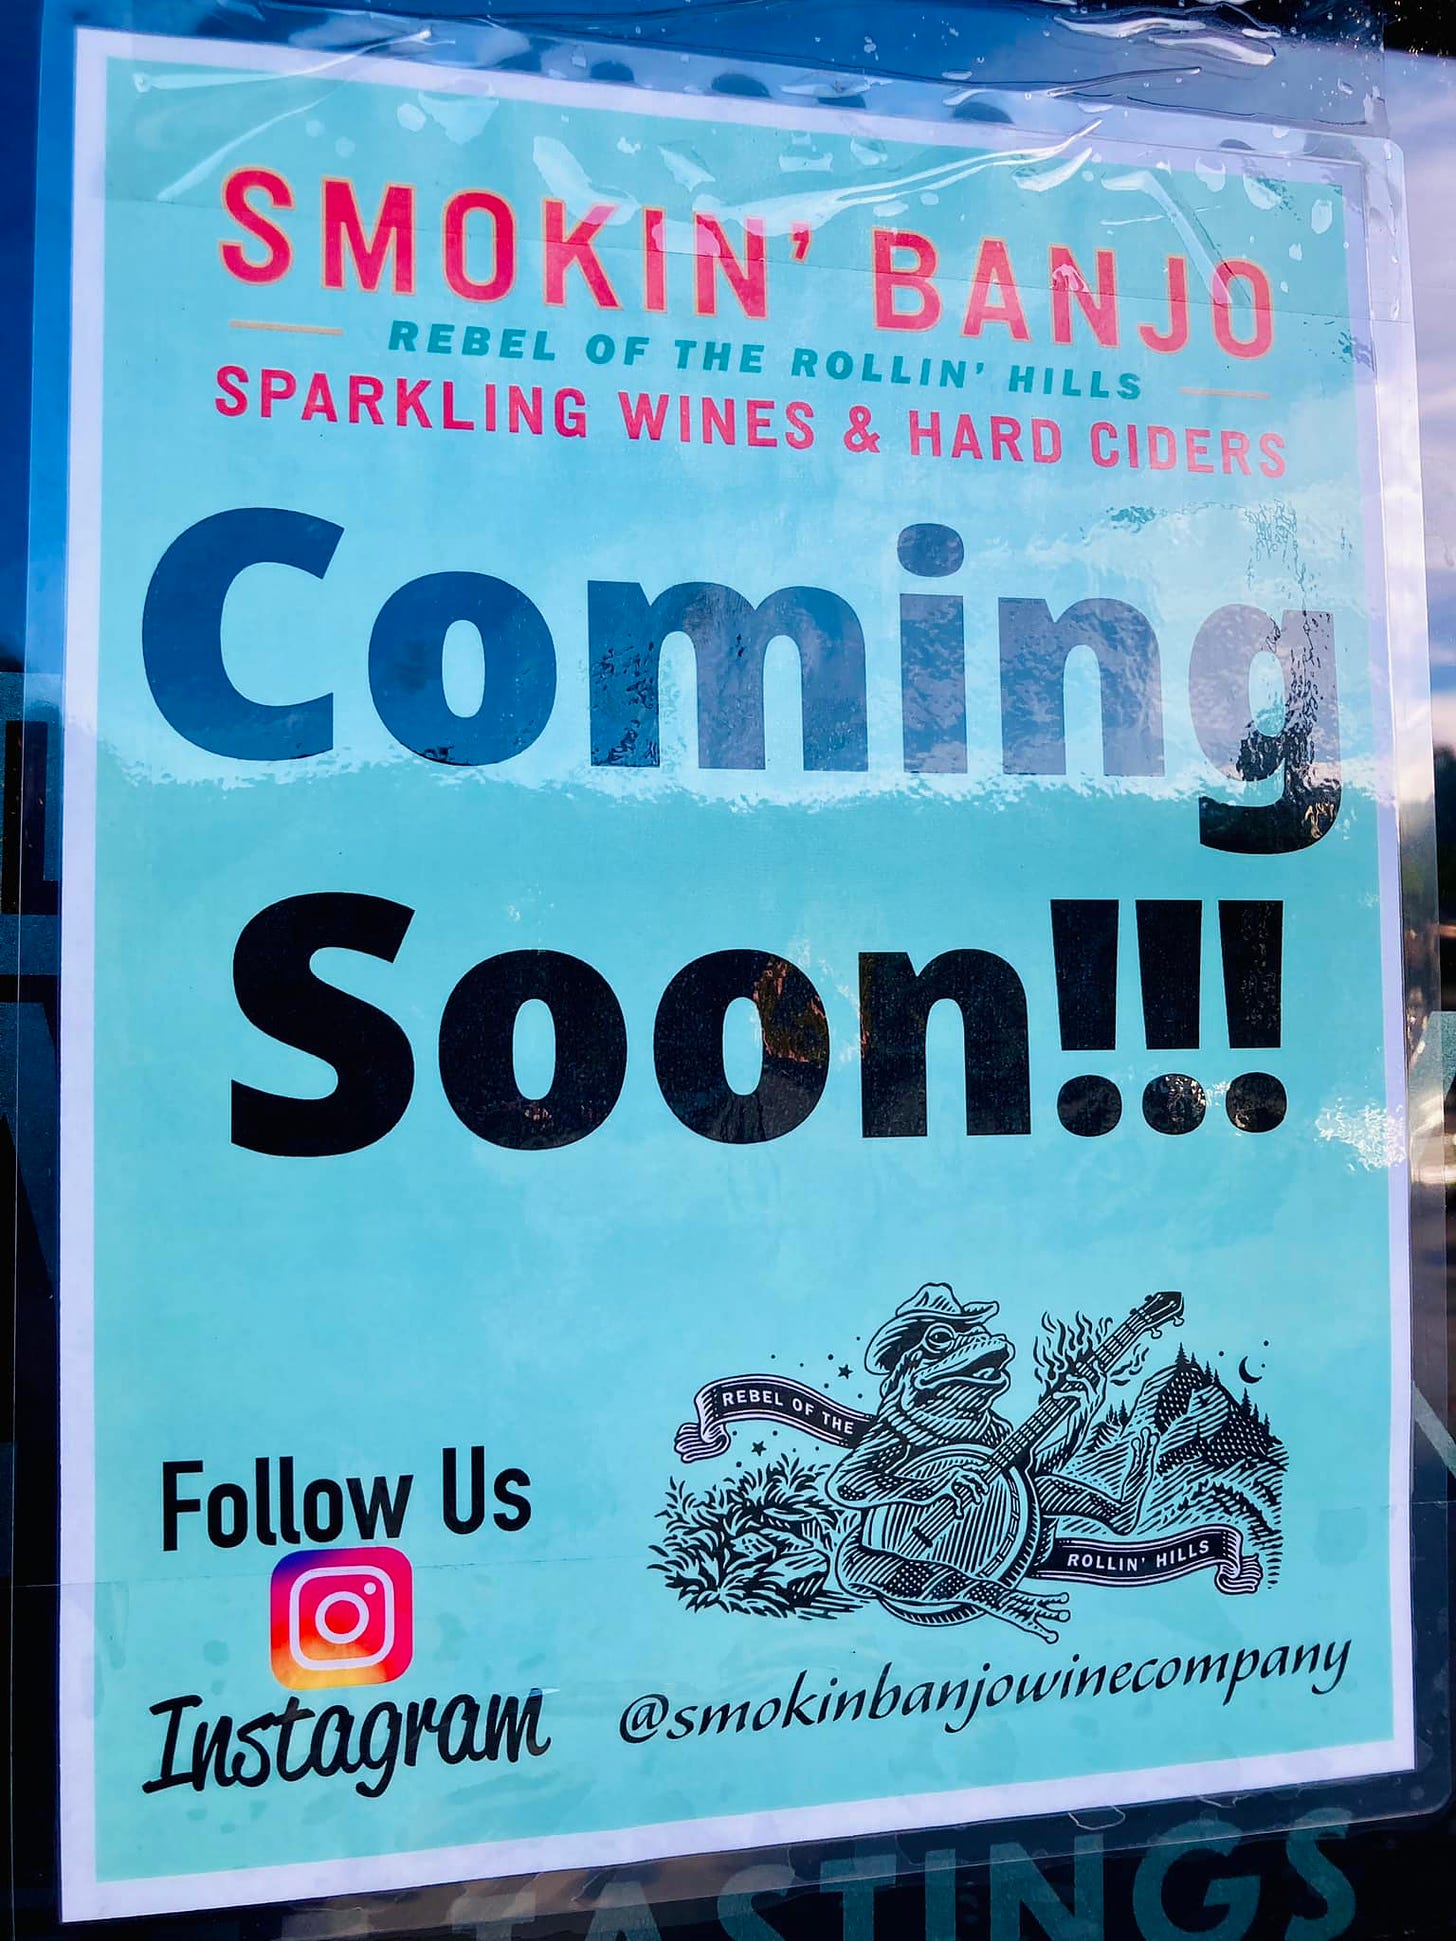 May be an image of text that says 'SMOKIN' REBEL OF THE ROLLIN' HILLS BANJO SPARKLING WINES & HARD CIDERS Comina Soon!!! Follow Us ROLLIN HILLS Instagram @smokinbanjowinecompany'